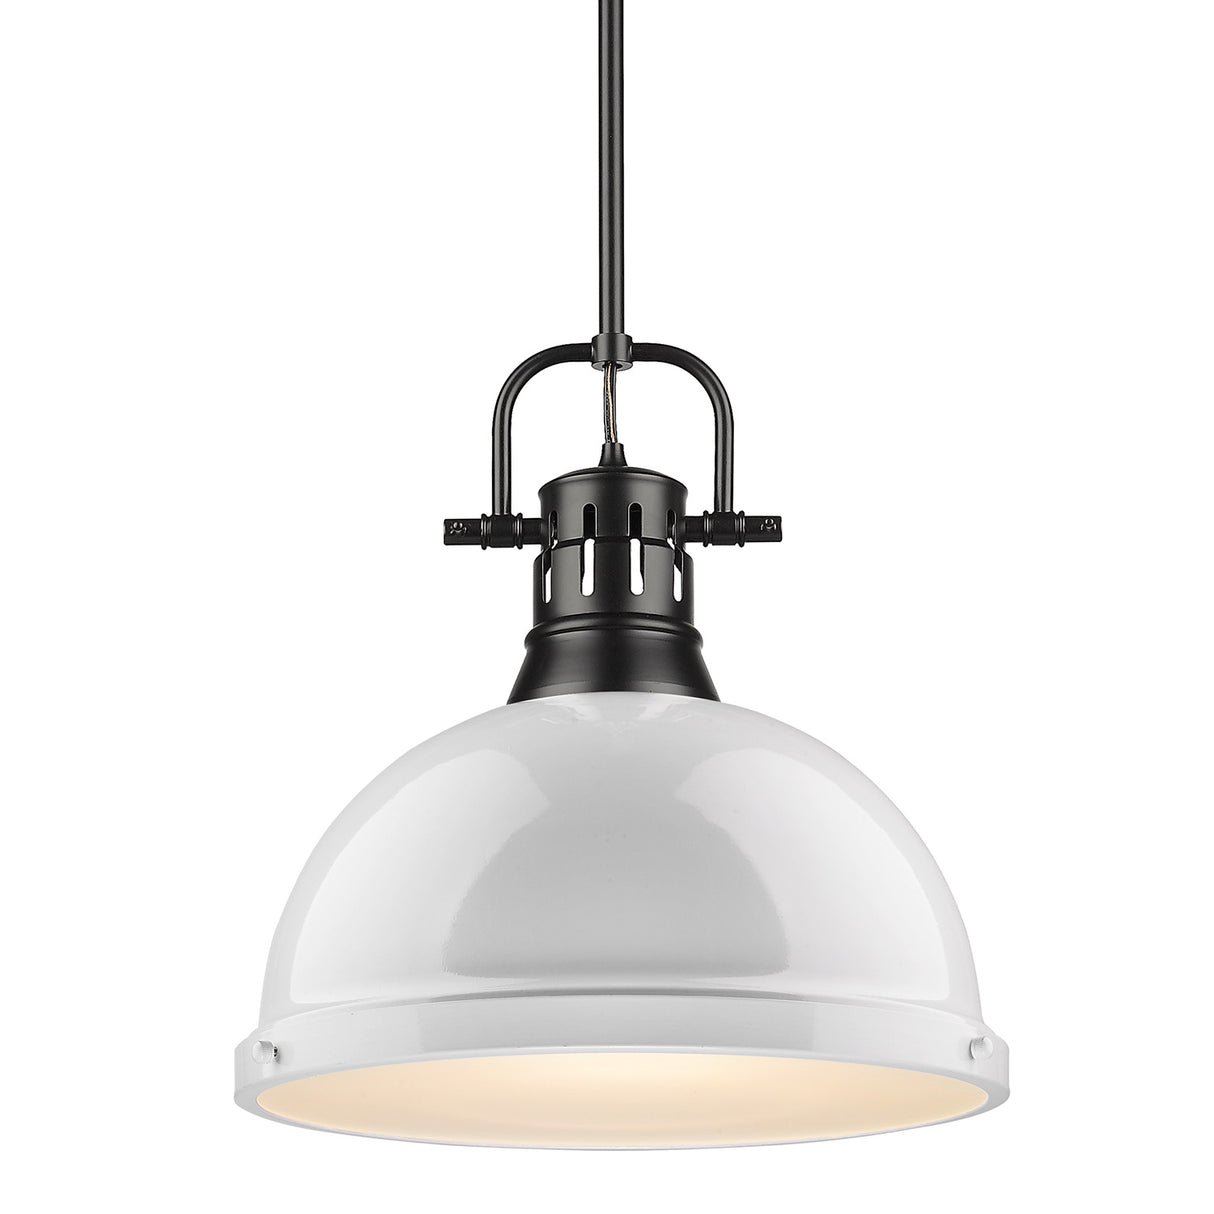 Duncan 1 Light Pendant with Rod in Matte Black with a White Shade